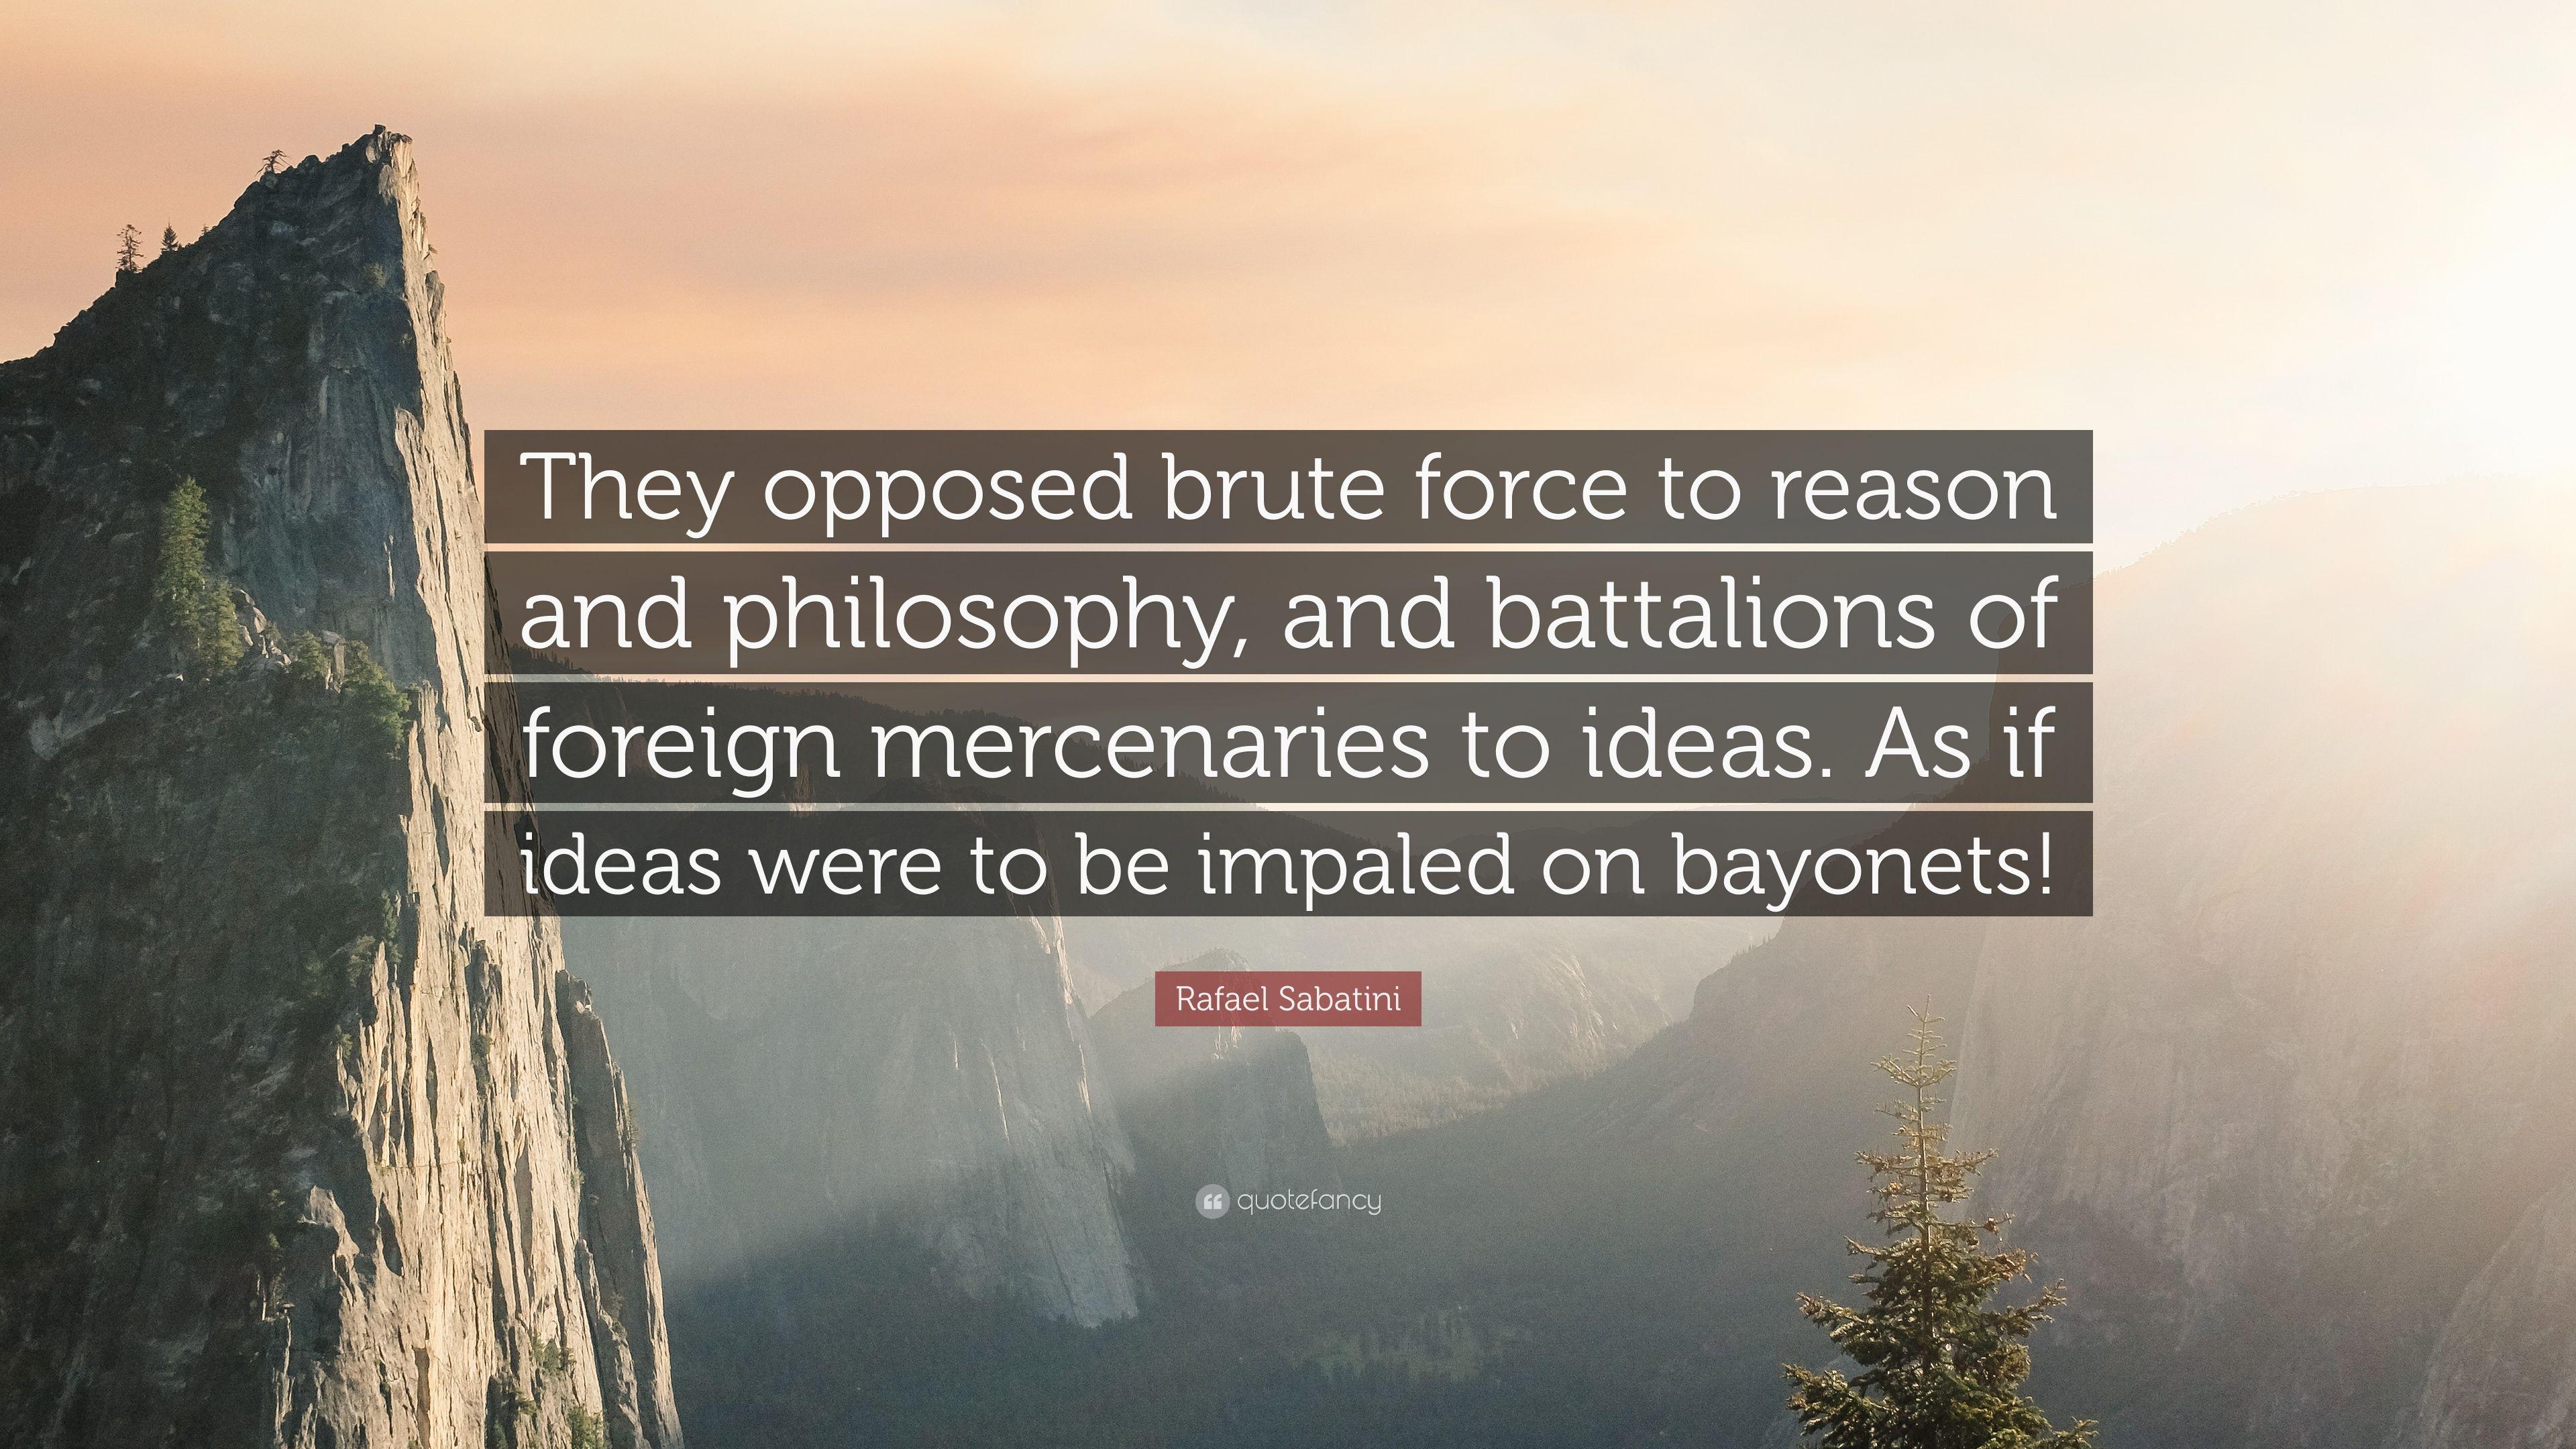 Rafael Sabatini Quote: “They opposed brute force to reason